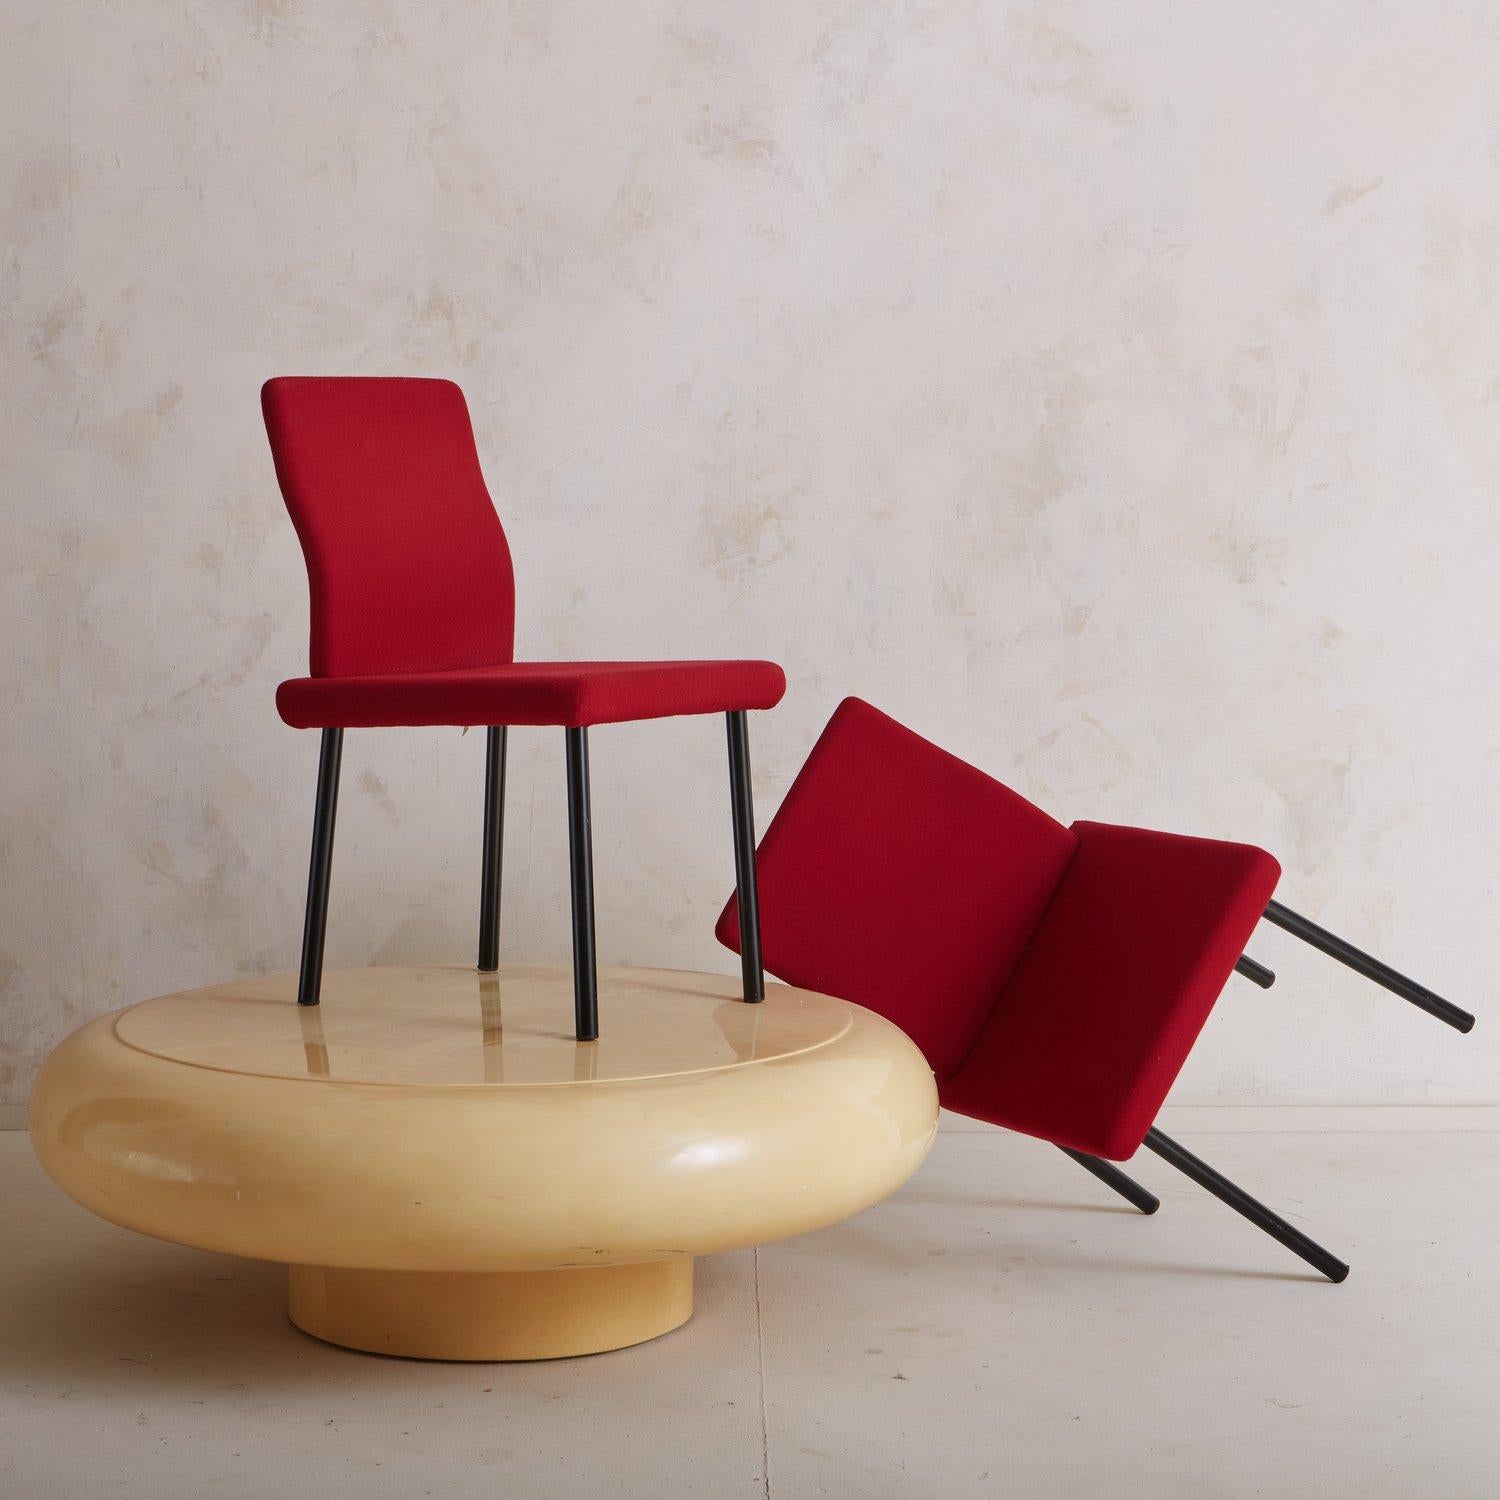  An iconic Mandarin chair designed by Ettore Sottsass for Knoll in 1986. This chair features vibrant red upholstery and sleek black enameled steel legs. We love the unusual proportions and slight curve in the seat back. ‘Knoll 1995 Made in Italy +